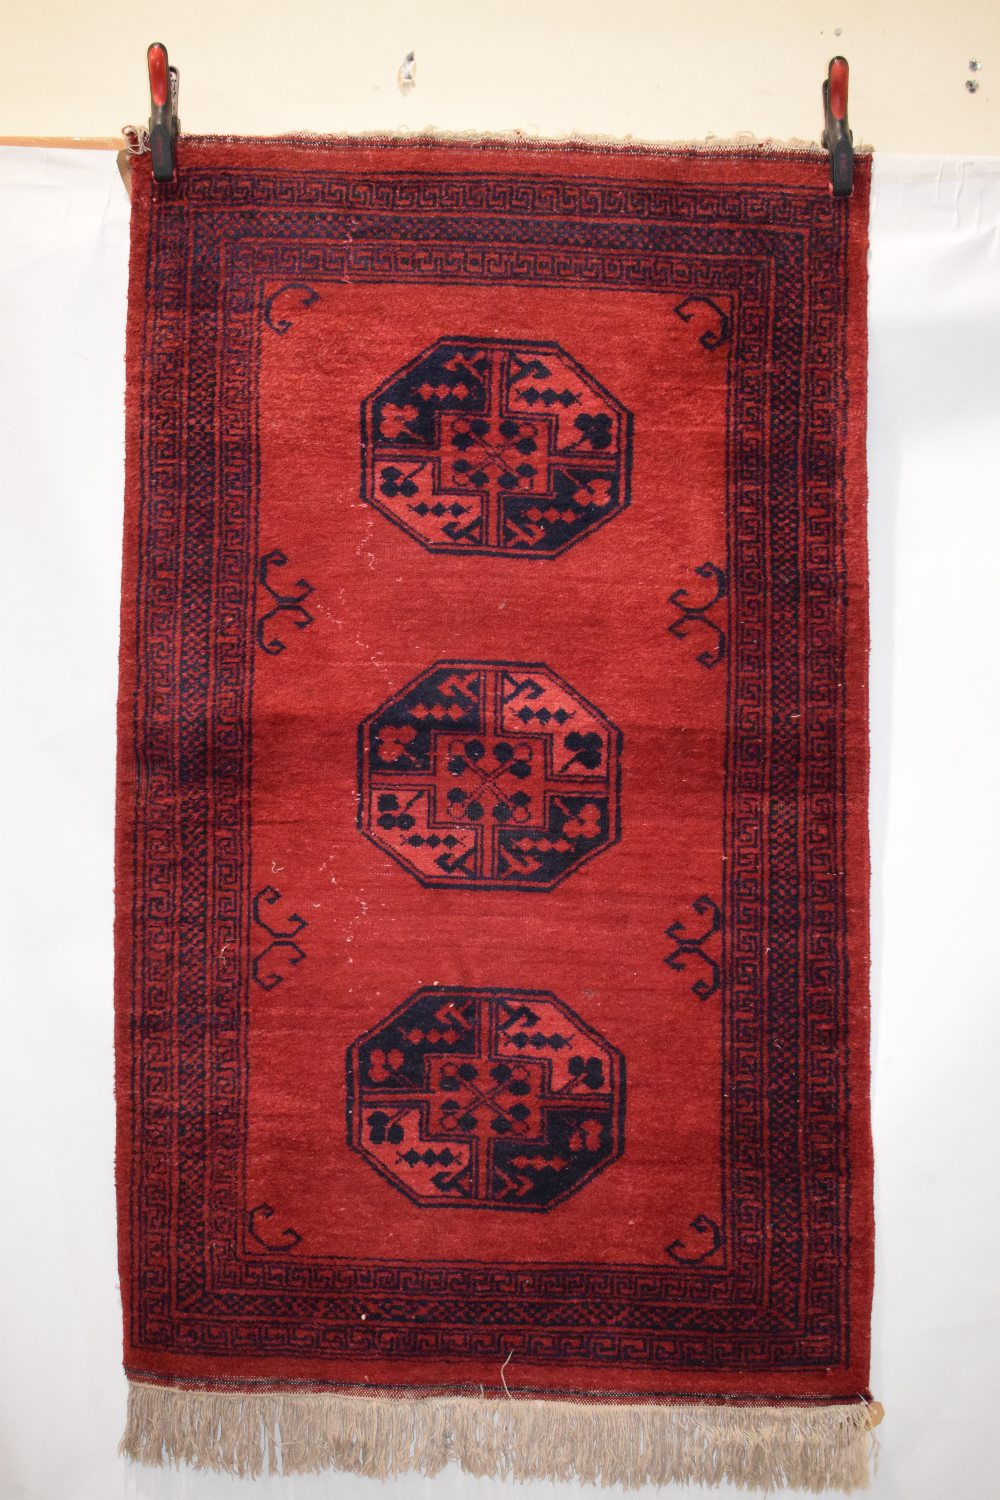 Two rugs: the first: Yomut Turkmen ensi, Turkmenistan, circa 1920s, 5ft. 7in. x 4ft. 7in. 1.70m. x - Image 11 of 16